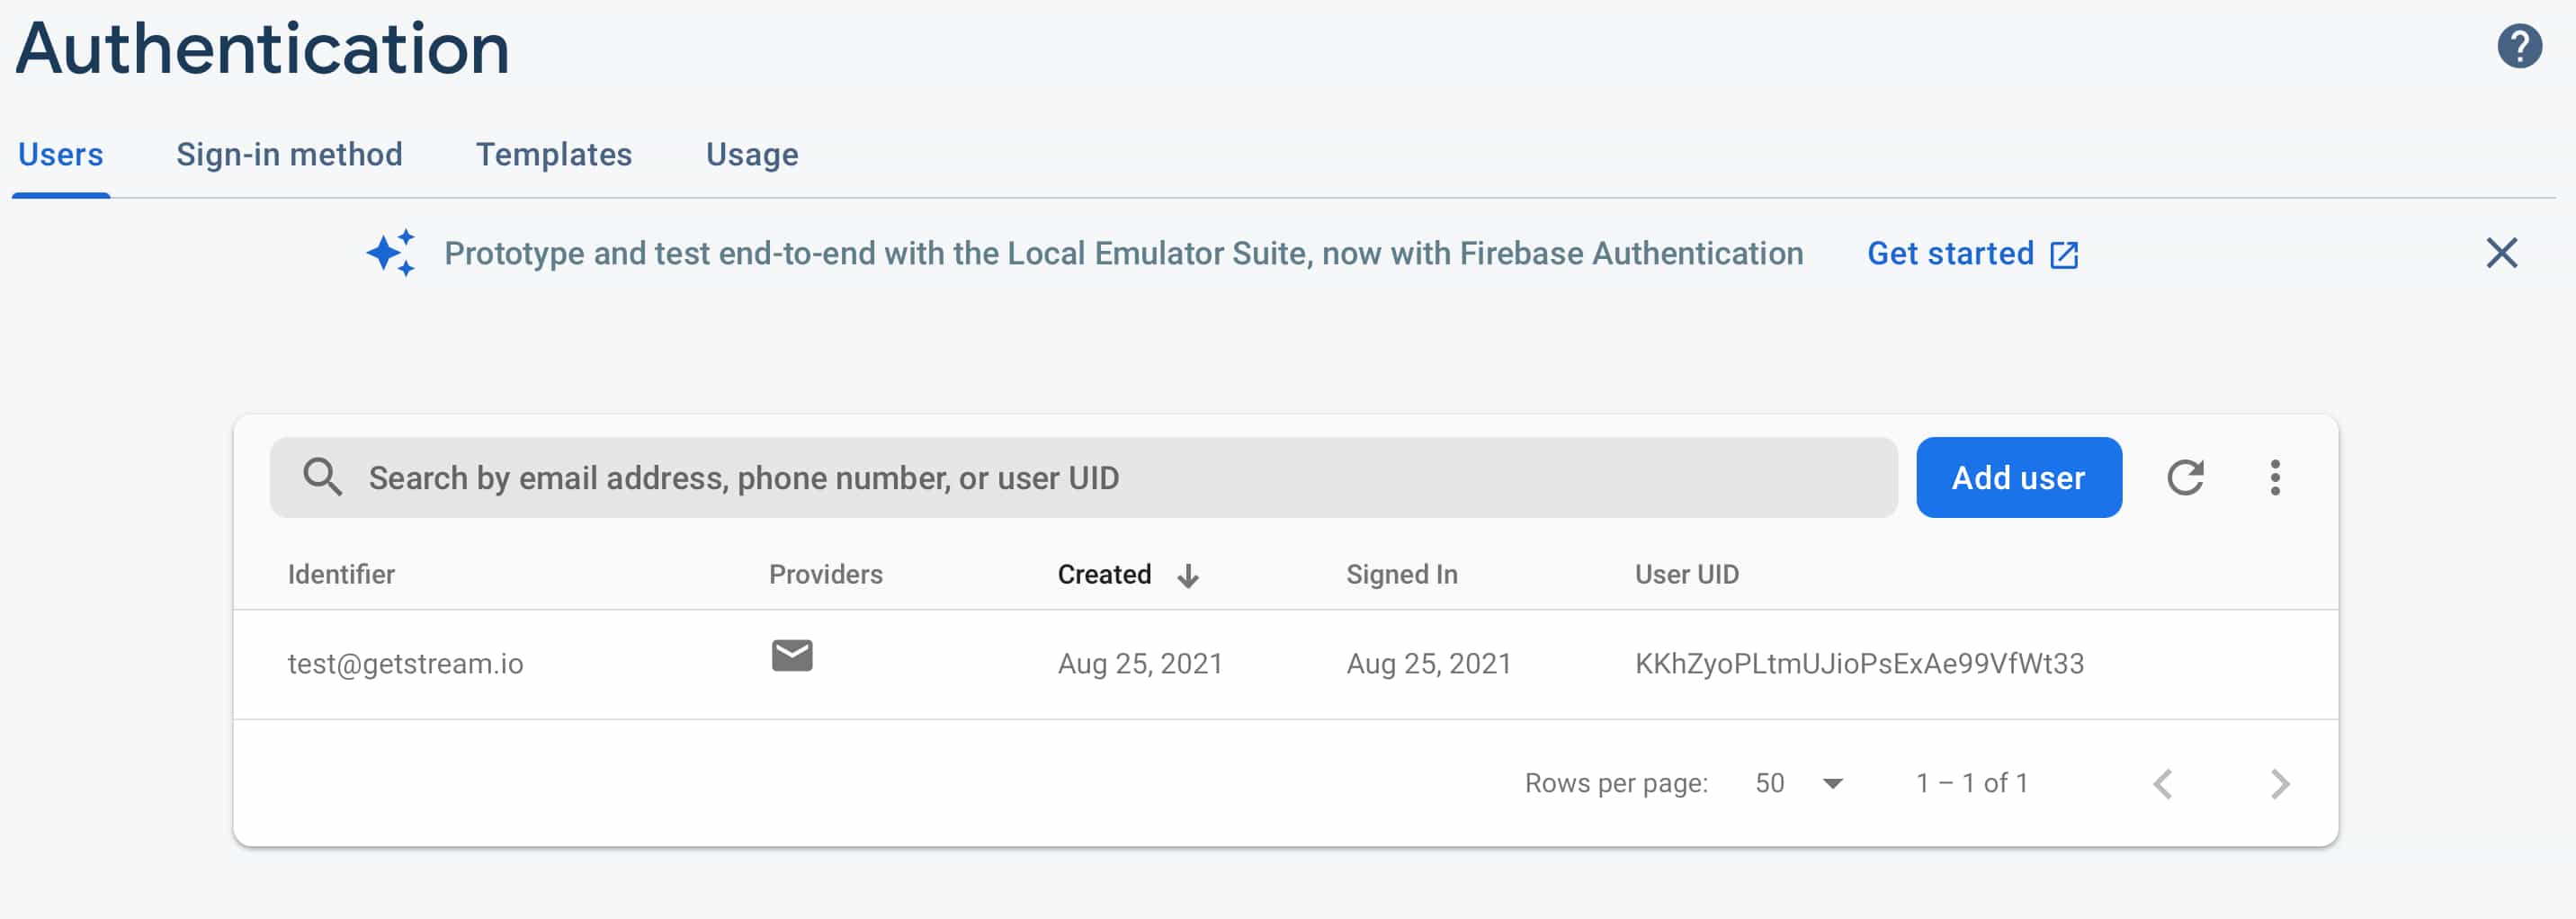 Firebase Auth Database with new user created